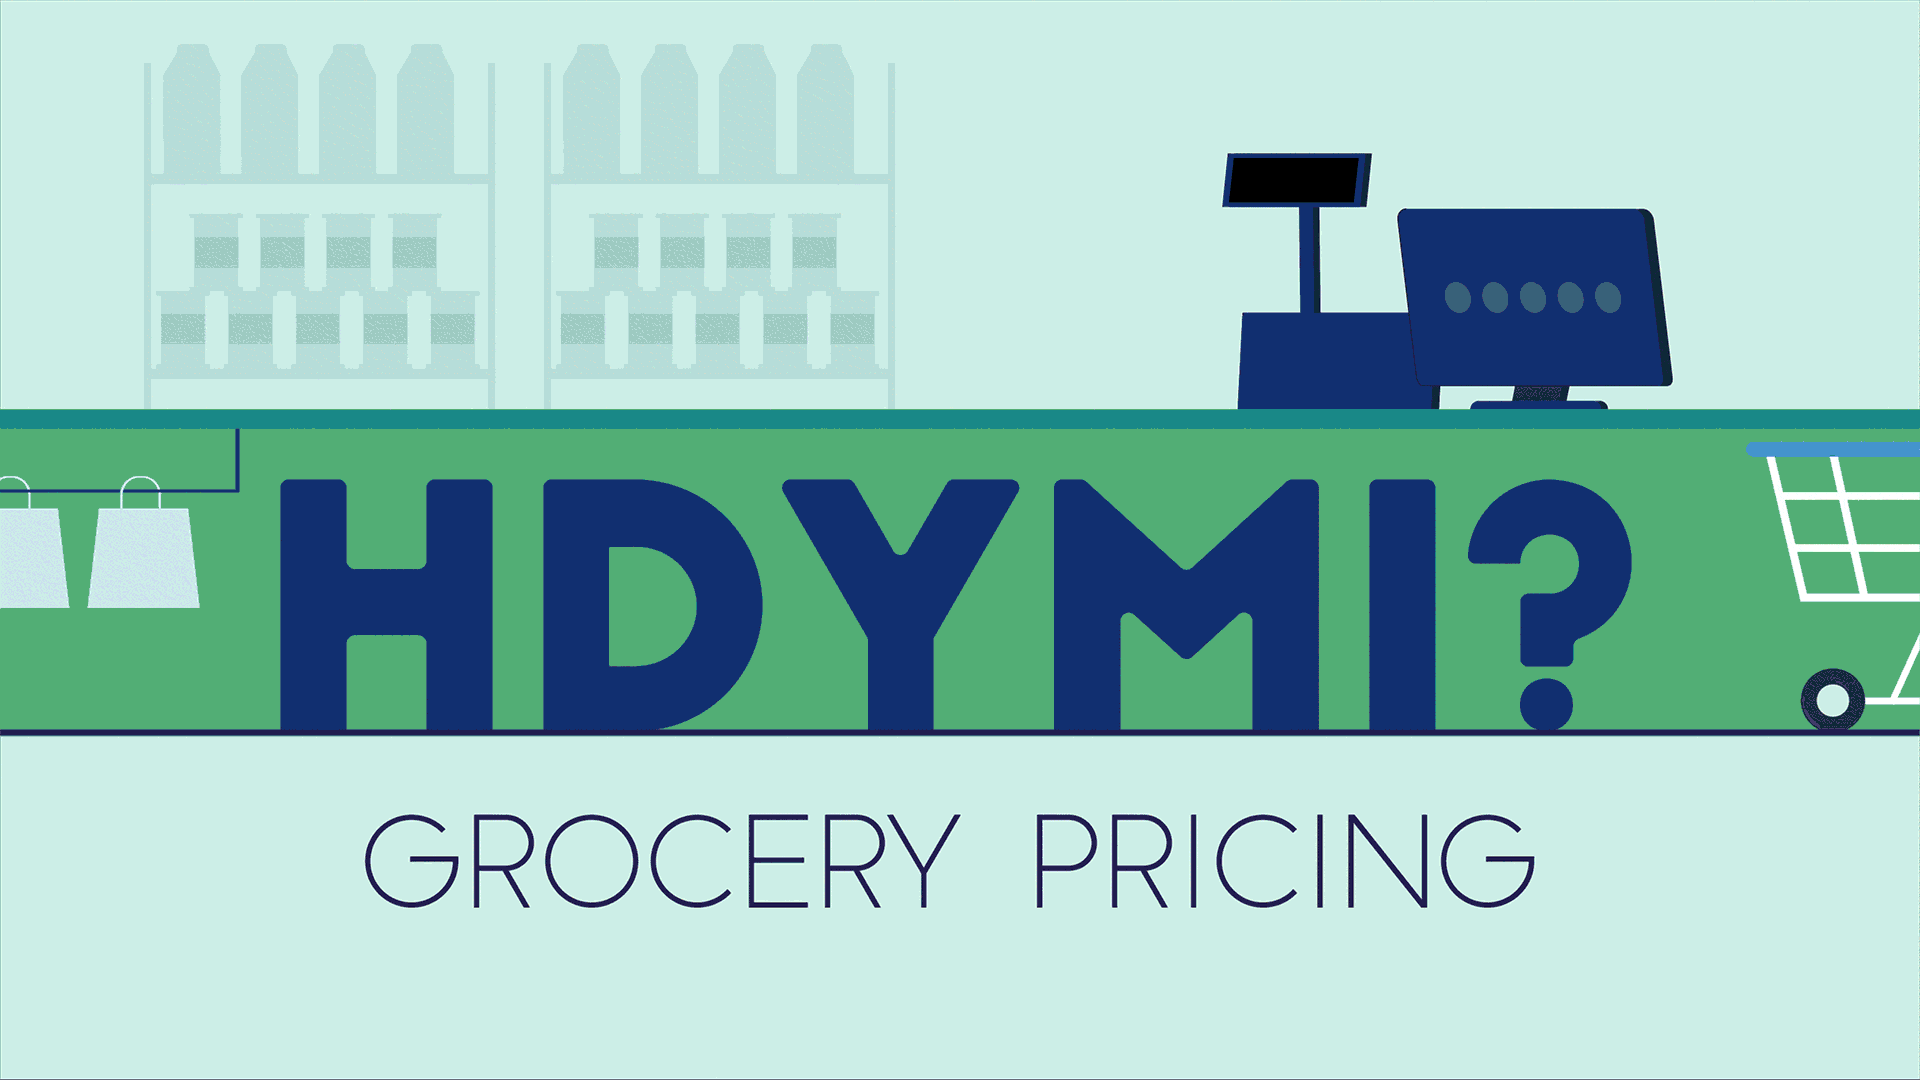 Animated illustration shows grocery items like meat, broccoli and bananas moving on the checkout belt with the words "HDYMI? Grocery Pricing."